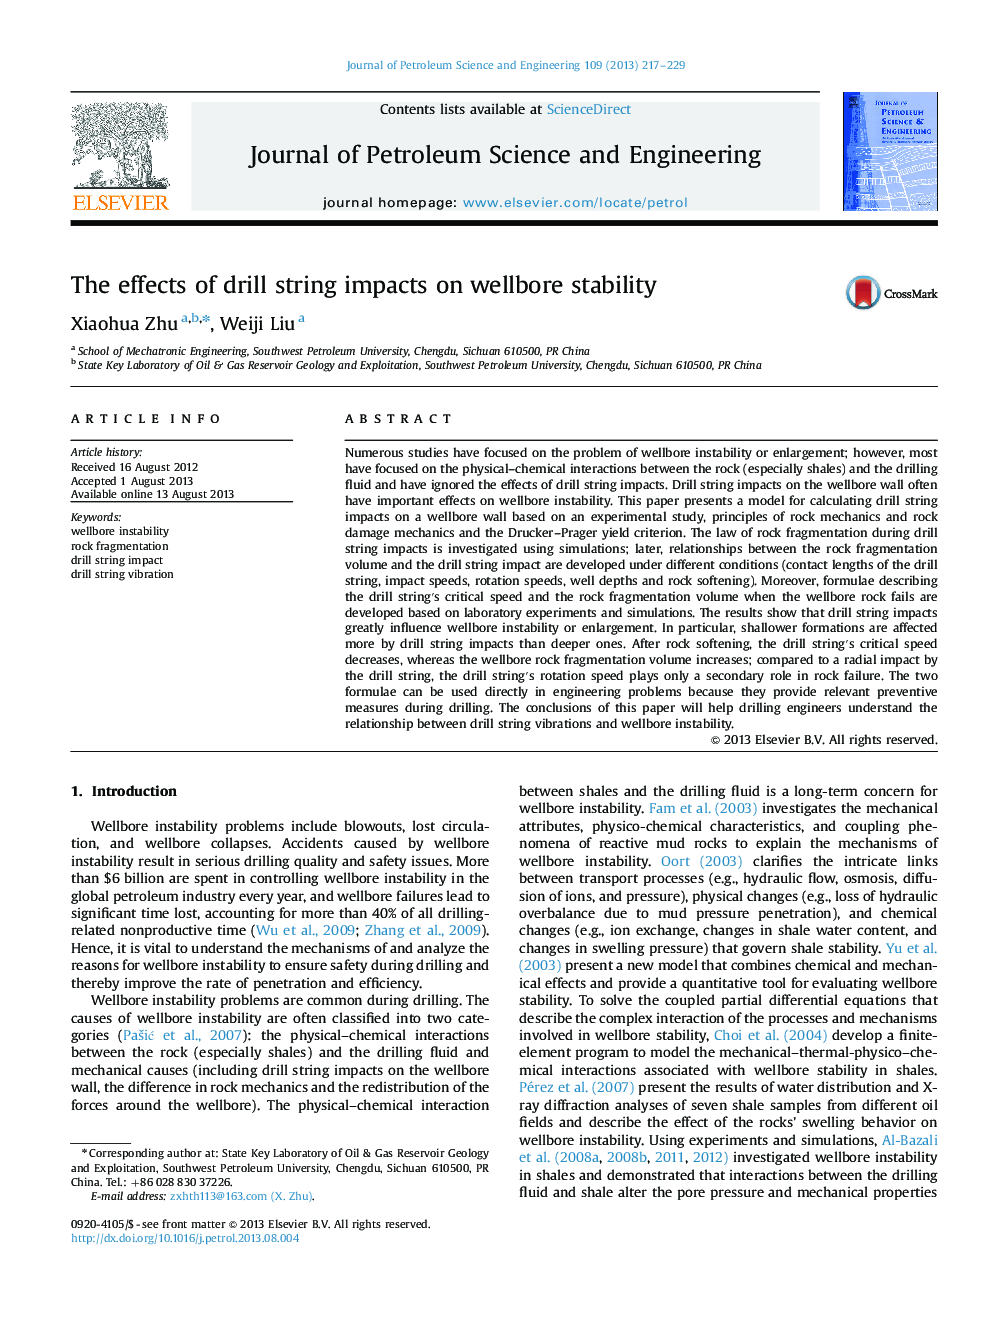 The effects of drill string impacts on wellbore stability